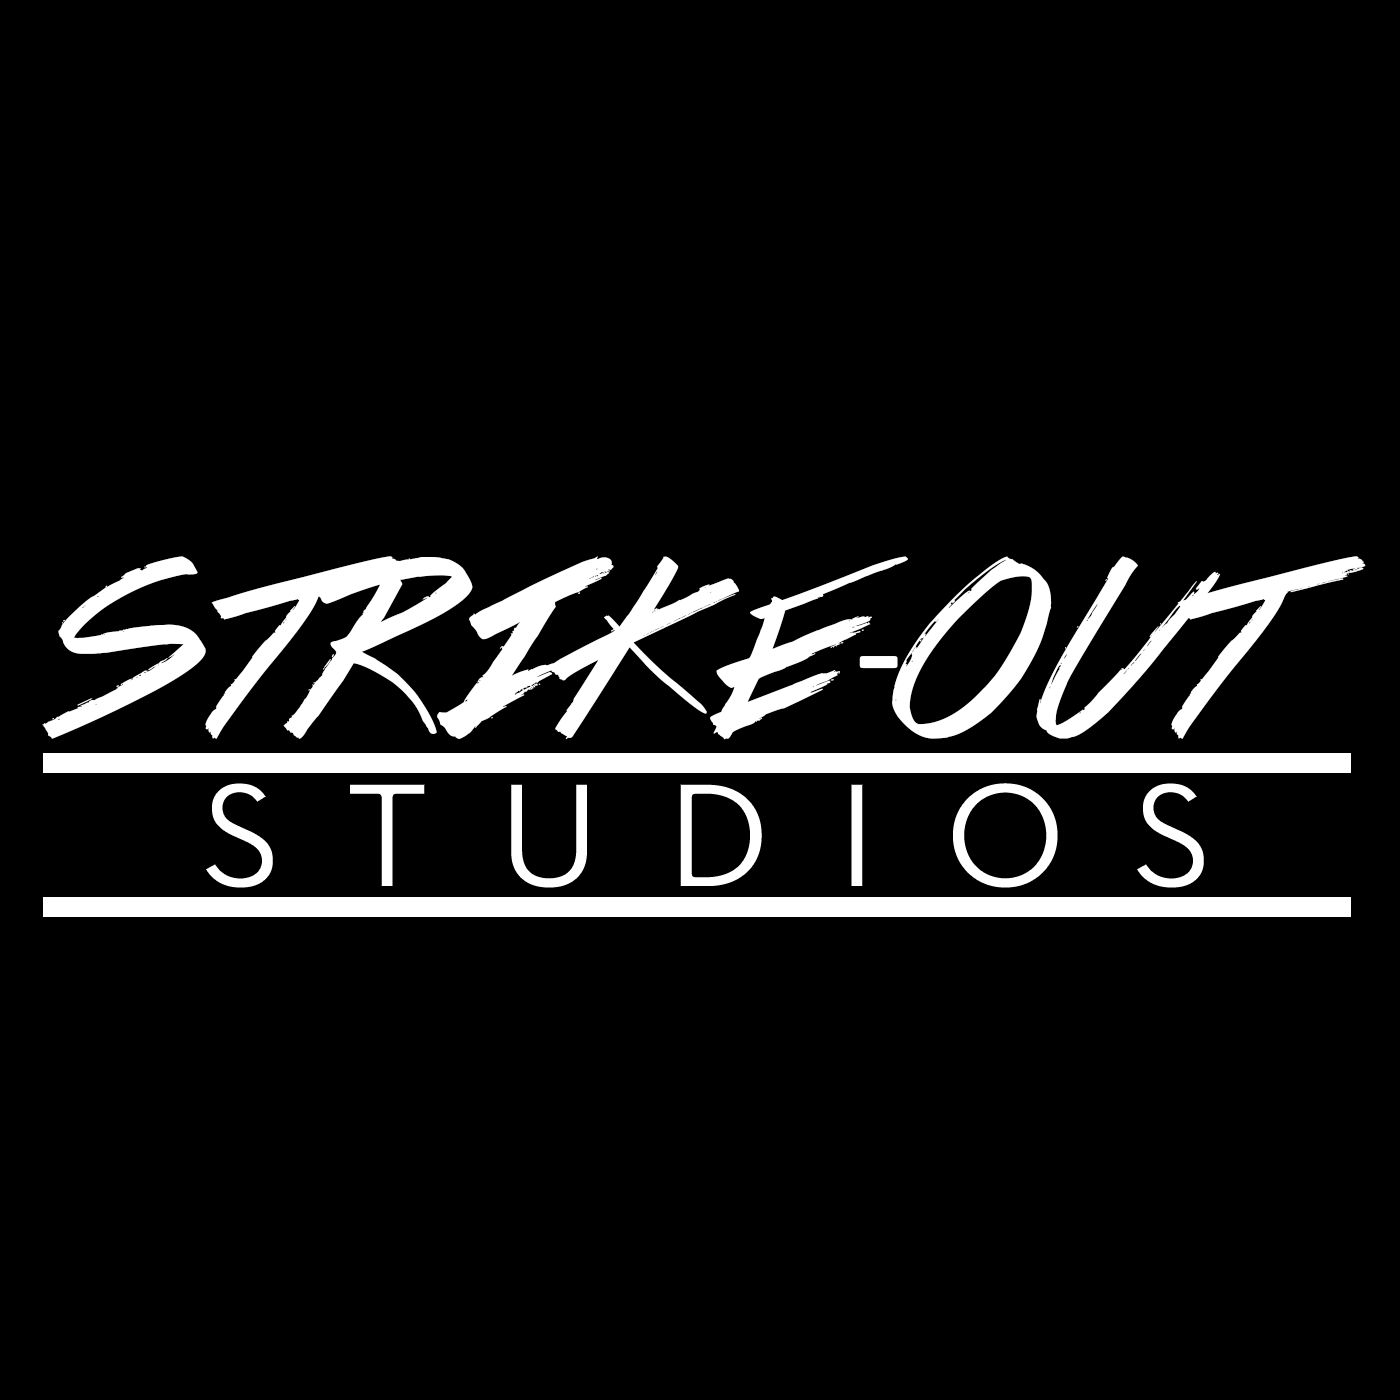 Stream Strike-Out Studios Listen to podcast episodes online for free on SoundCloud